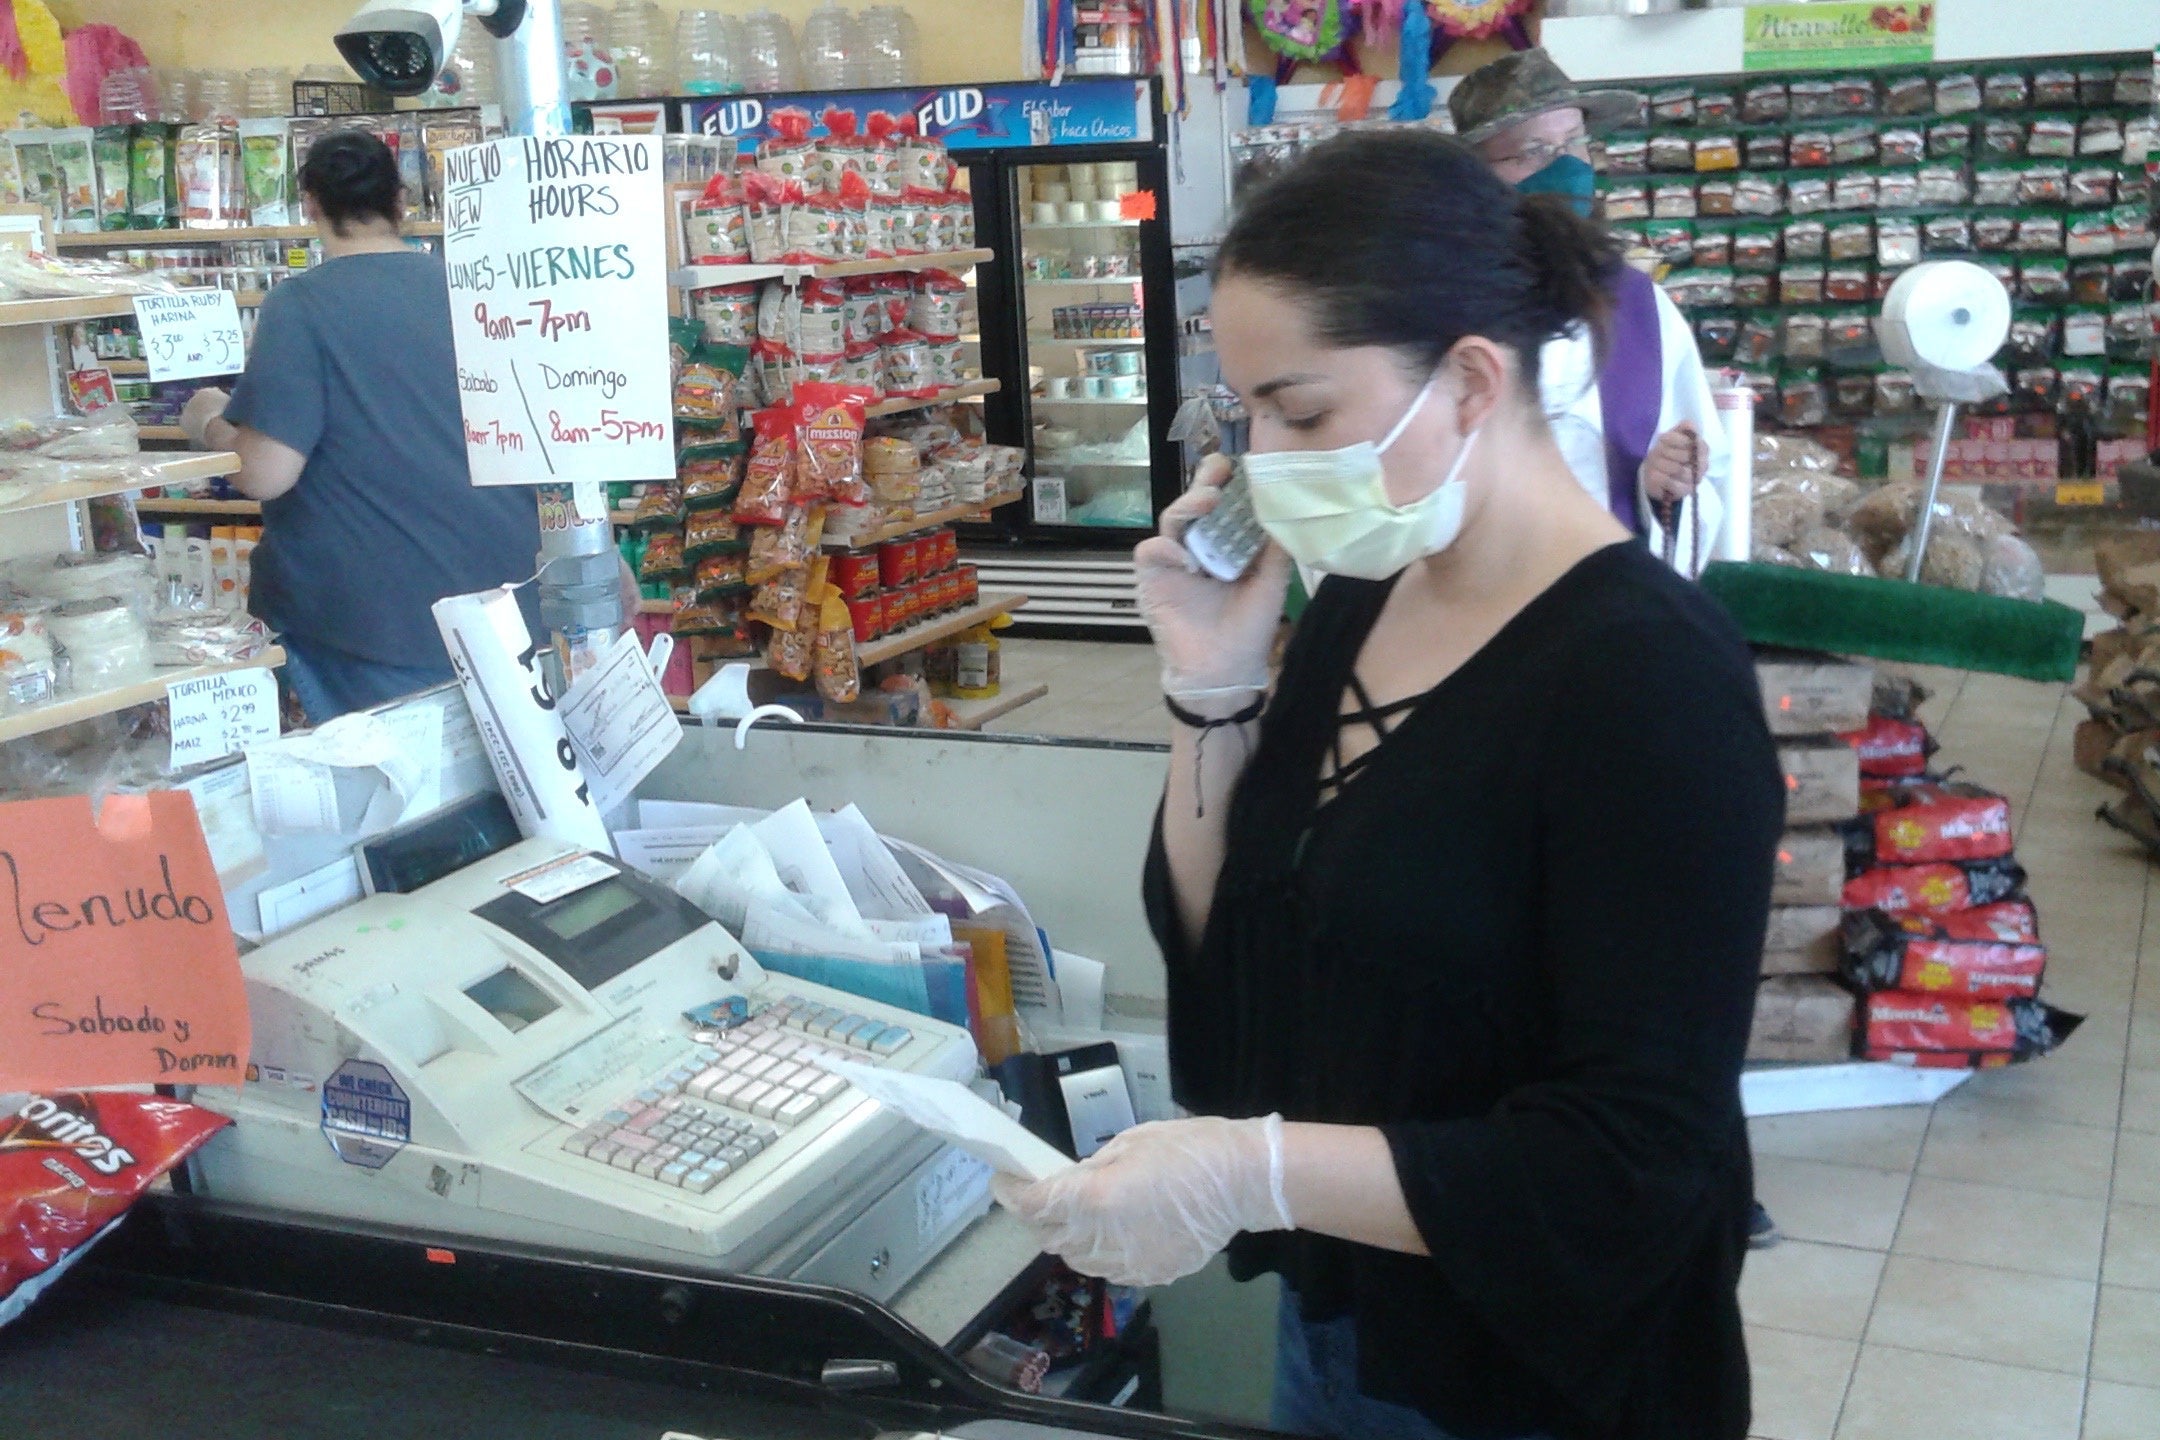 A woman wearing a mask stands behind a cash register and holds a cellphone up to her ear.